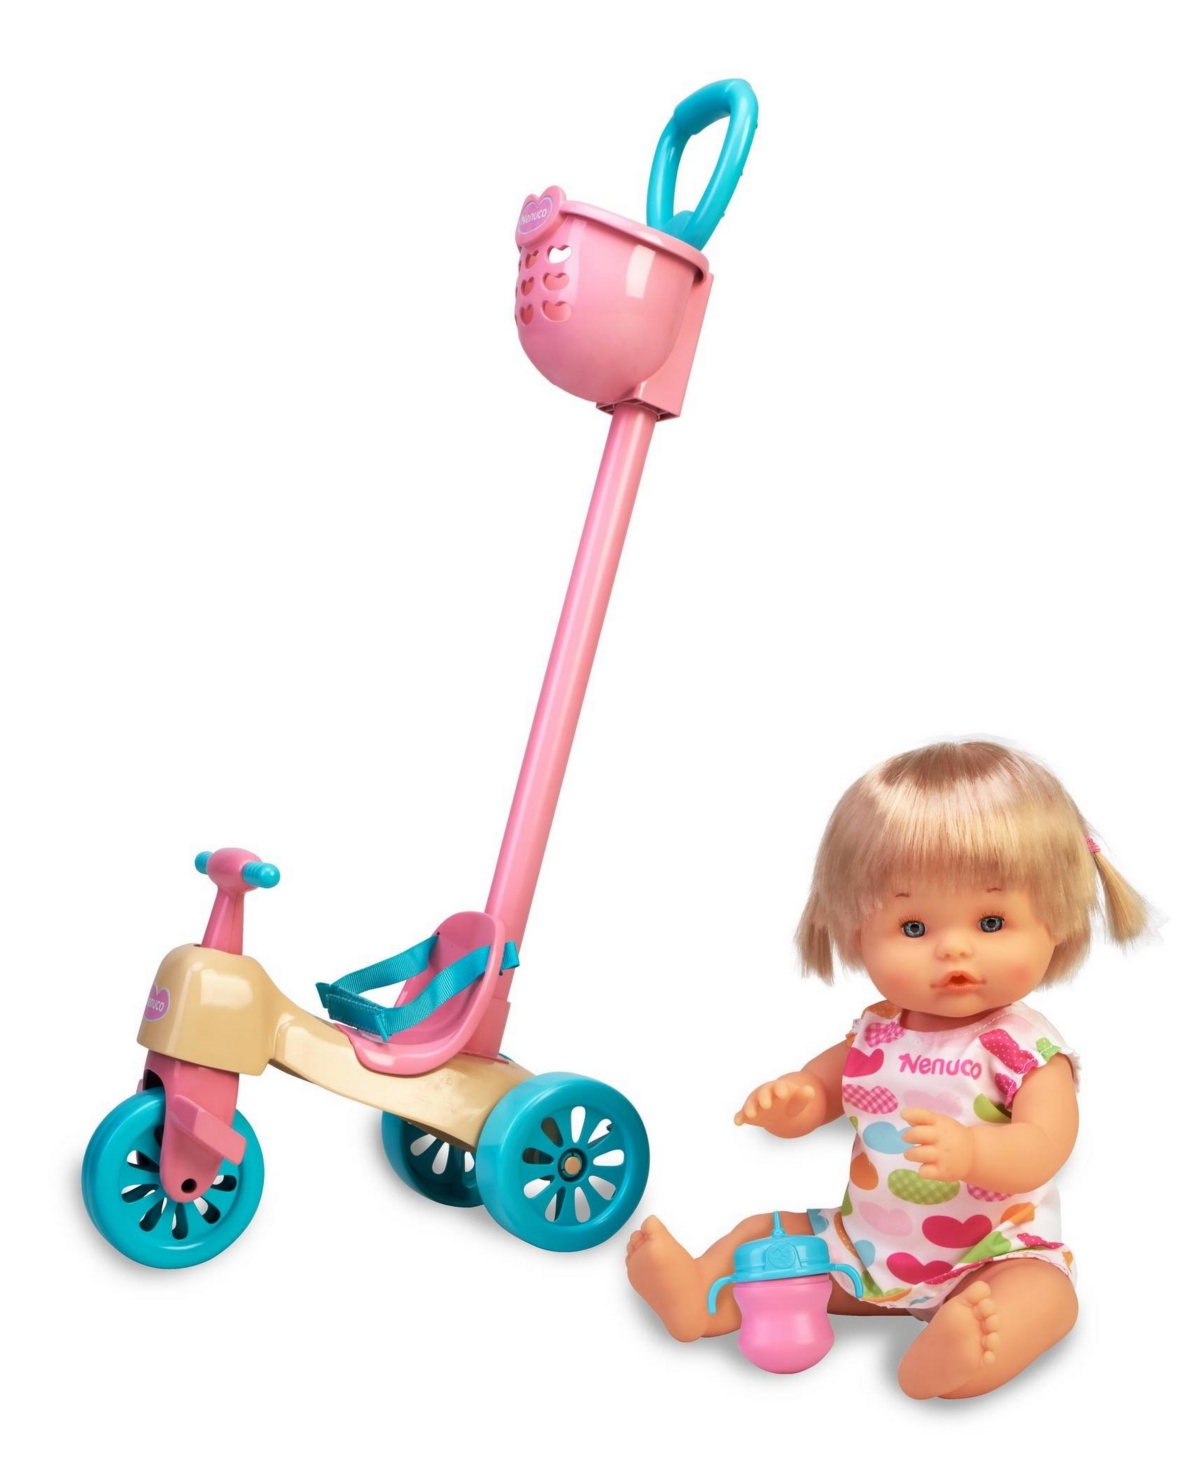 Nenuco Babies' And Her Tricycle Doll In Multicolor